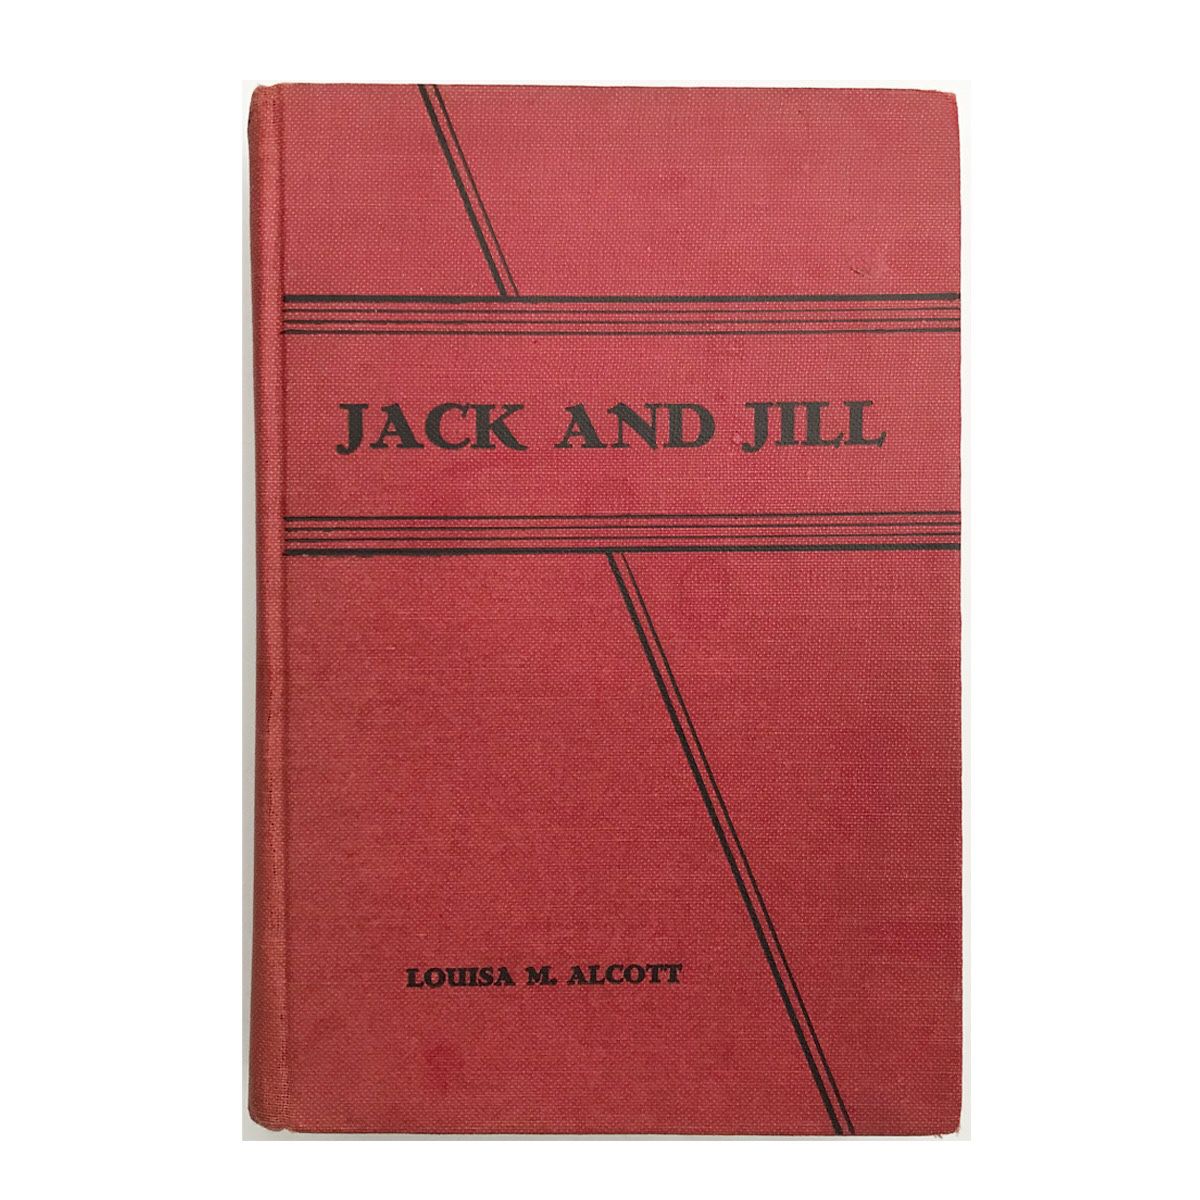 Vintage Jack and Jill Book by Louisa M. Alcott Early Edition. Illustrated. In very good condition.